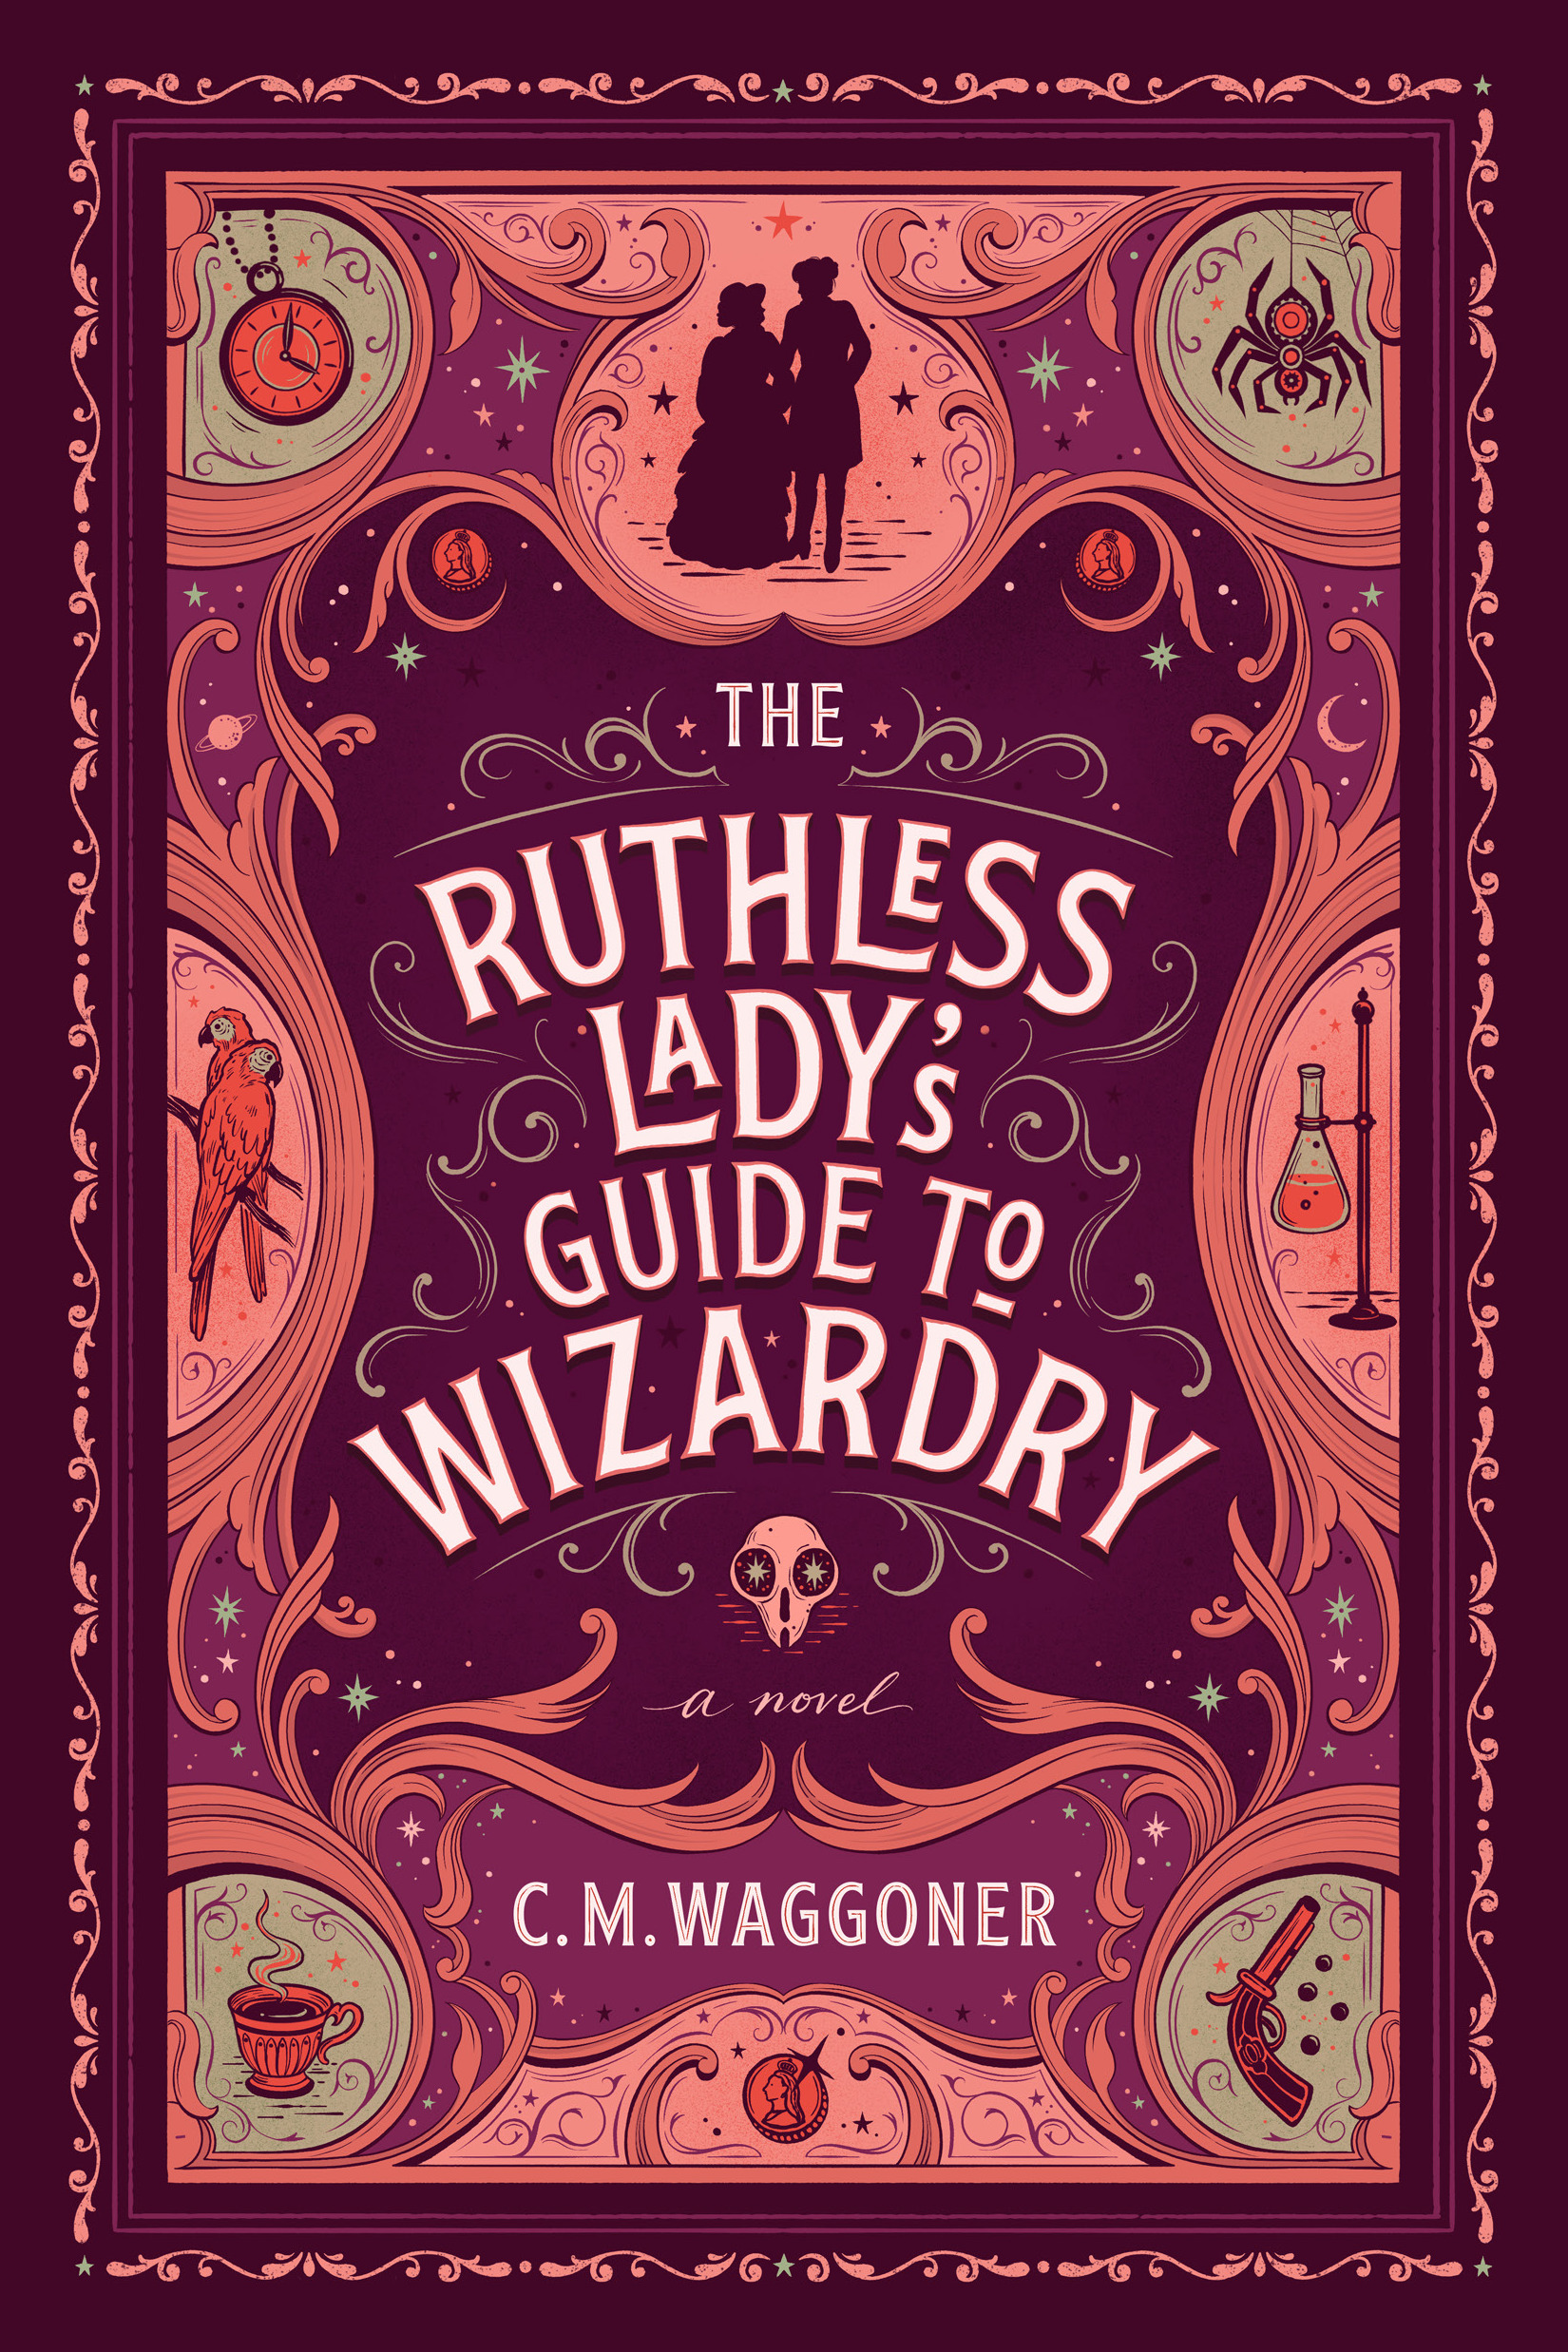 The Ruthless Lady's Guide to Wizardry | Waggoner, C. M.